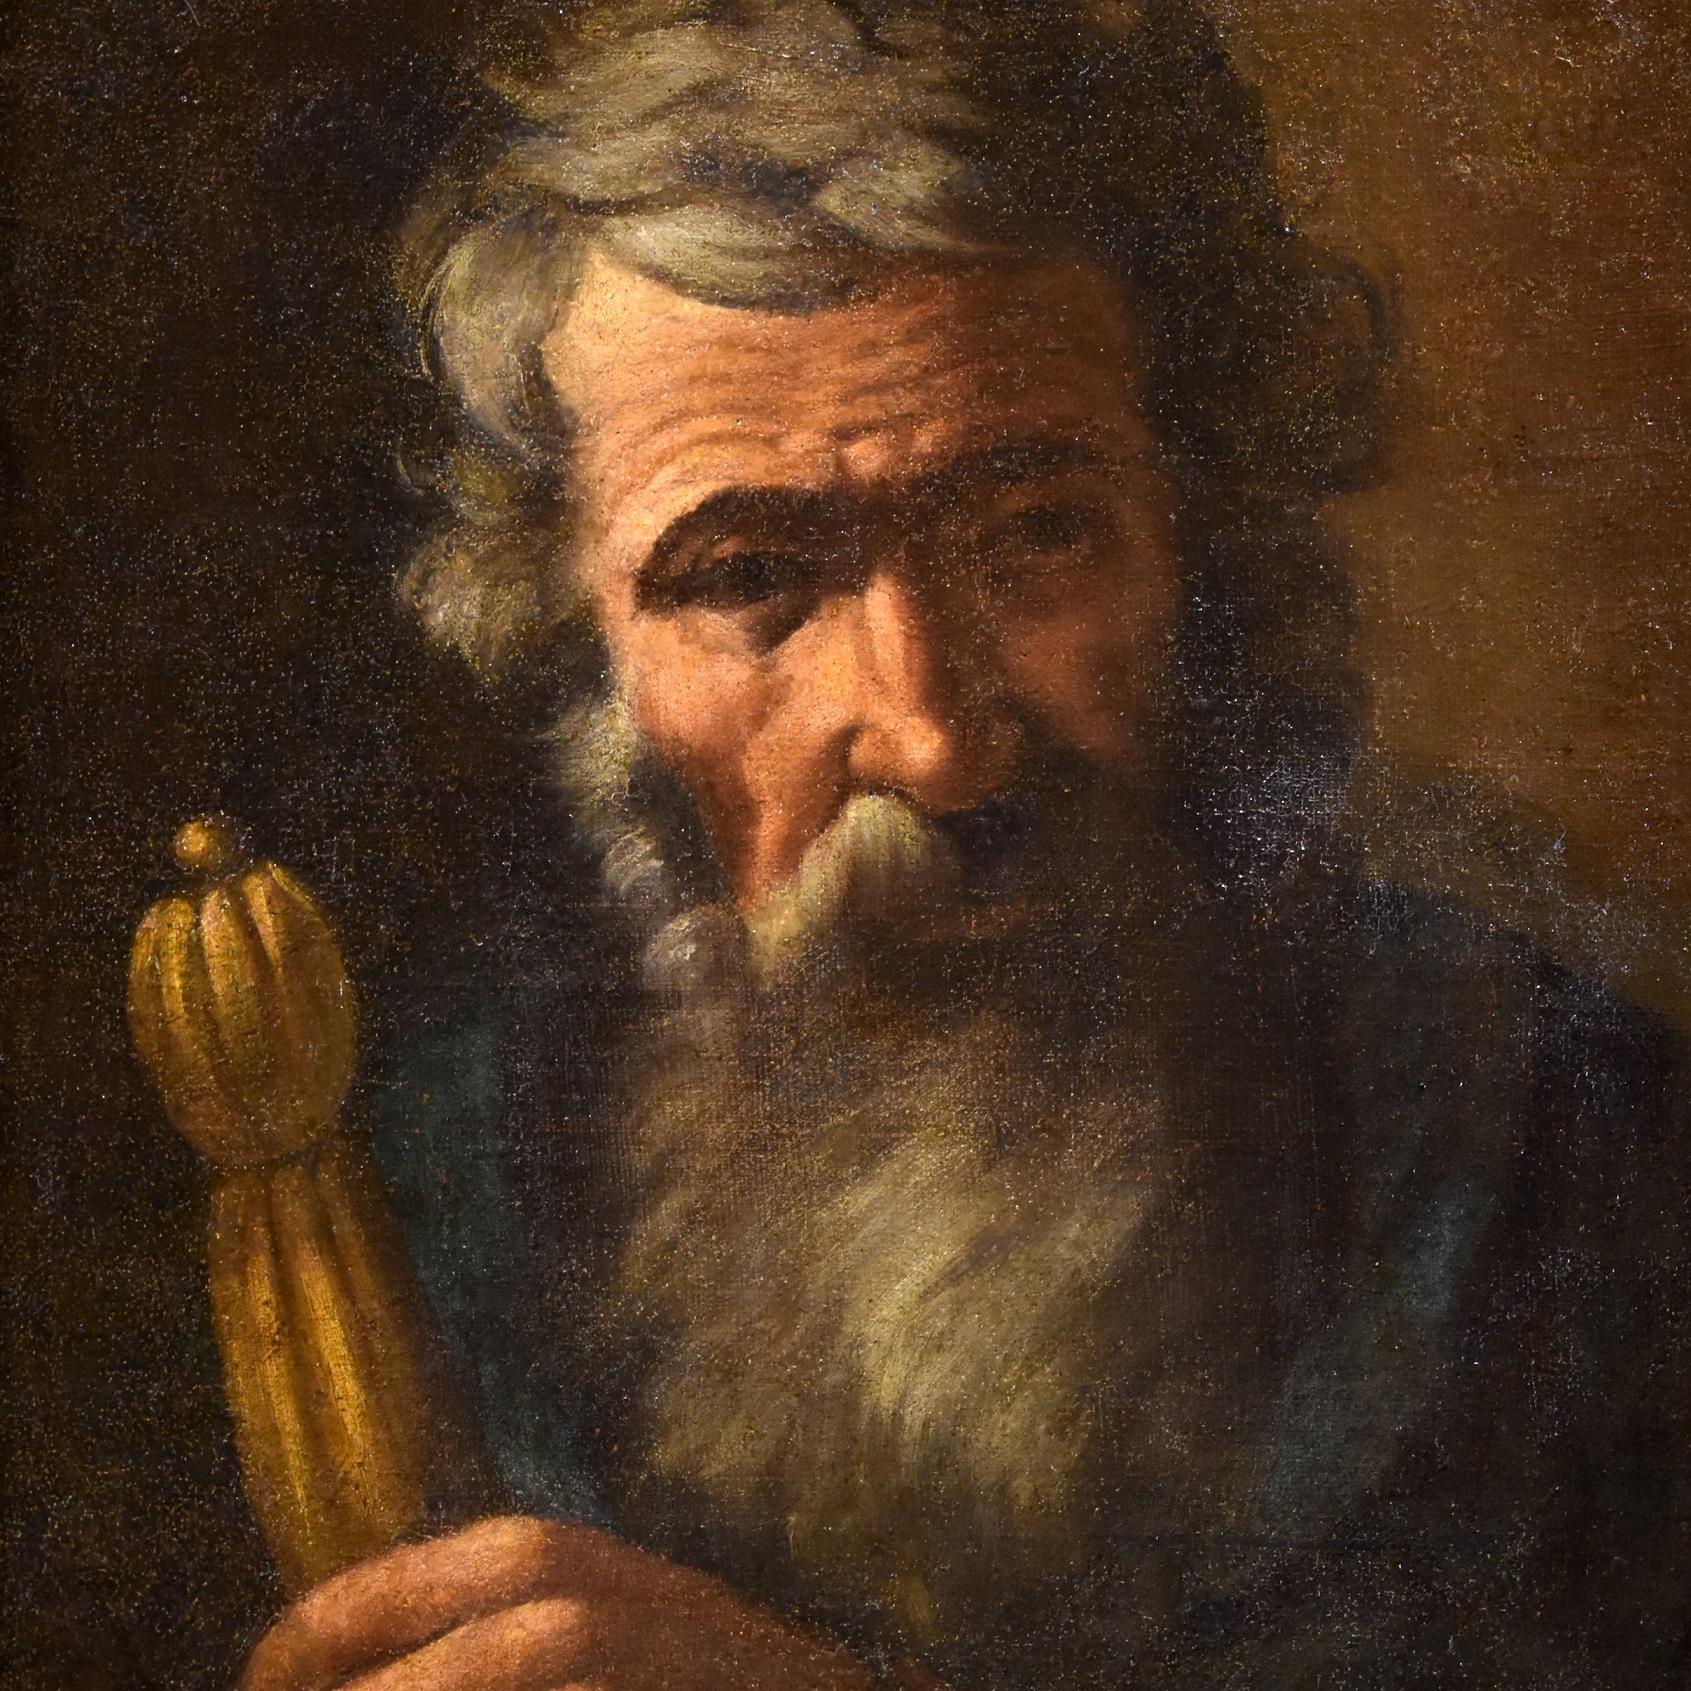 Saint Paul the Apostle
Francesco Fracanzano (Monopoli, 1612 - Naples, 1656) circle of
Oil on canvas (54 x 42 cm. - Framed 71 x 58 cm.)

The work shows us the intense image of St. Paul the Apostle, portrayed according to the typical iconography that